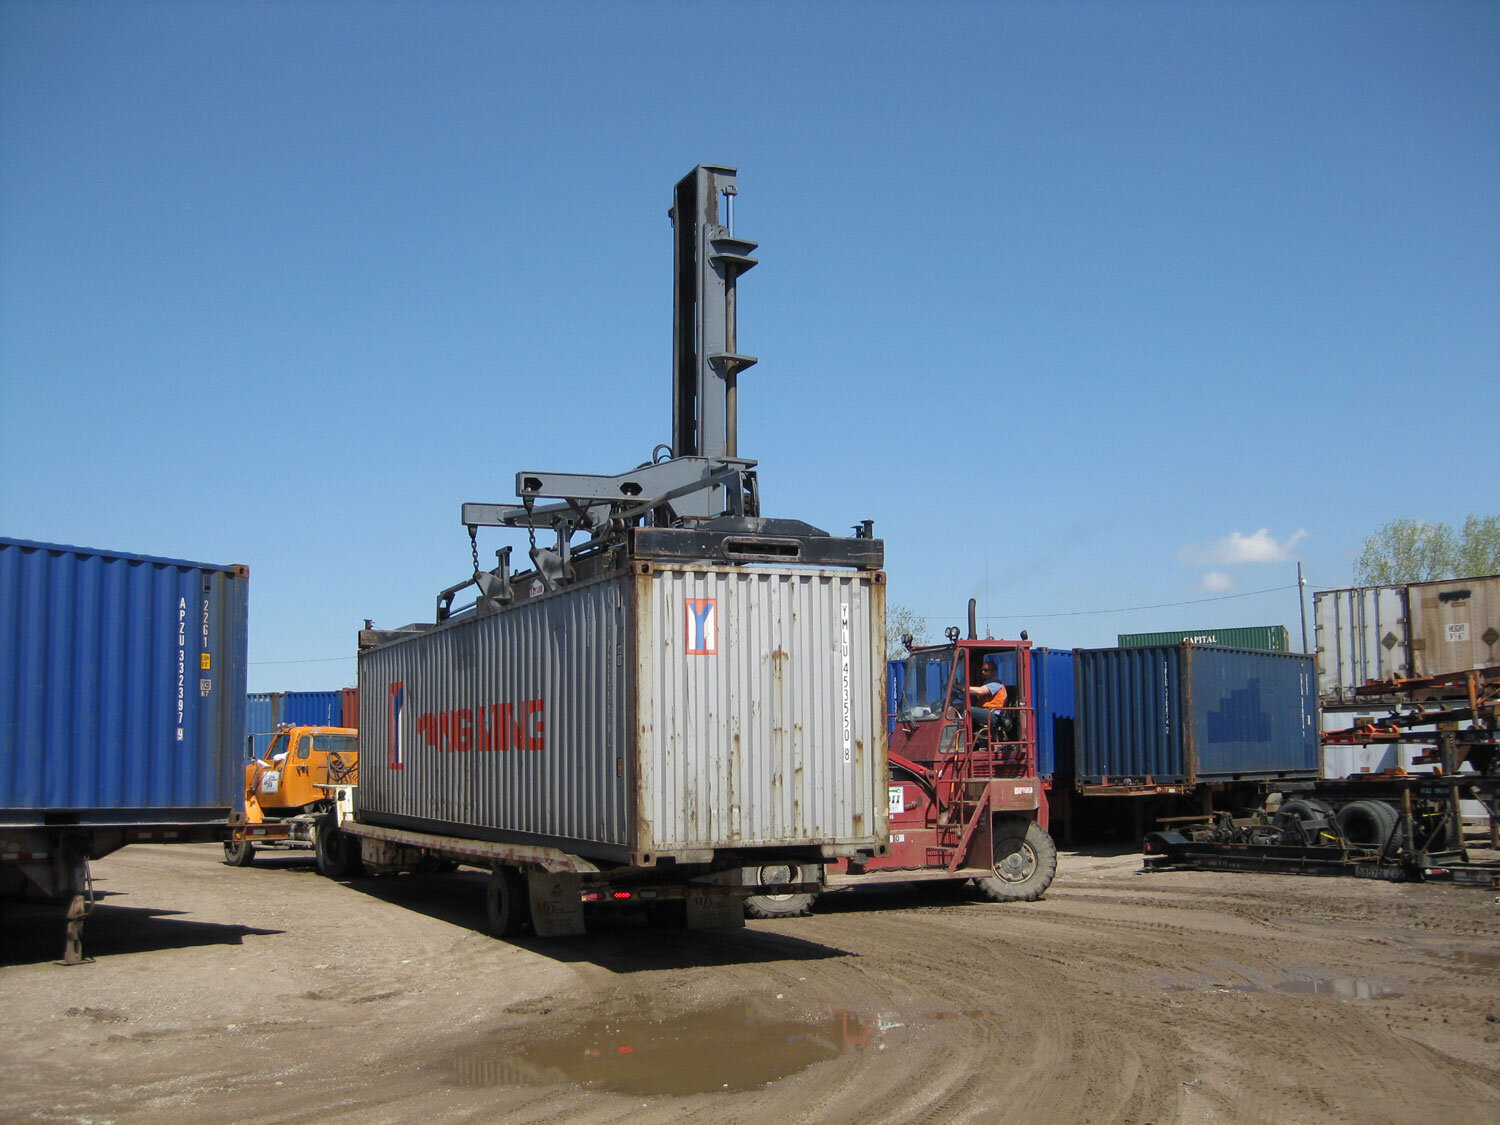 Forklifts can lift full containers and put them on truckss